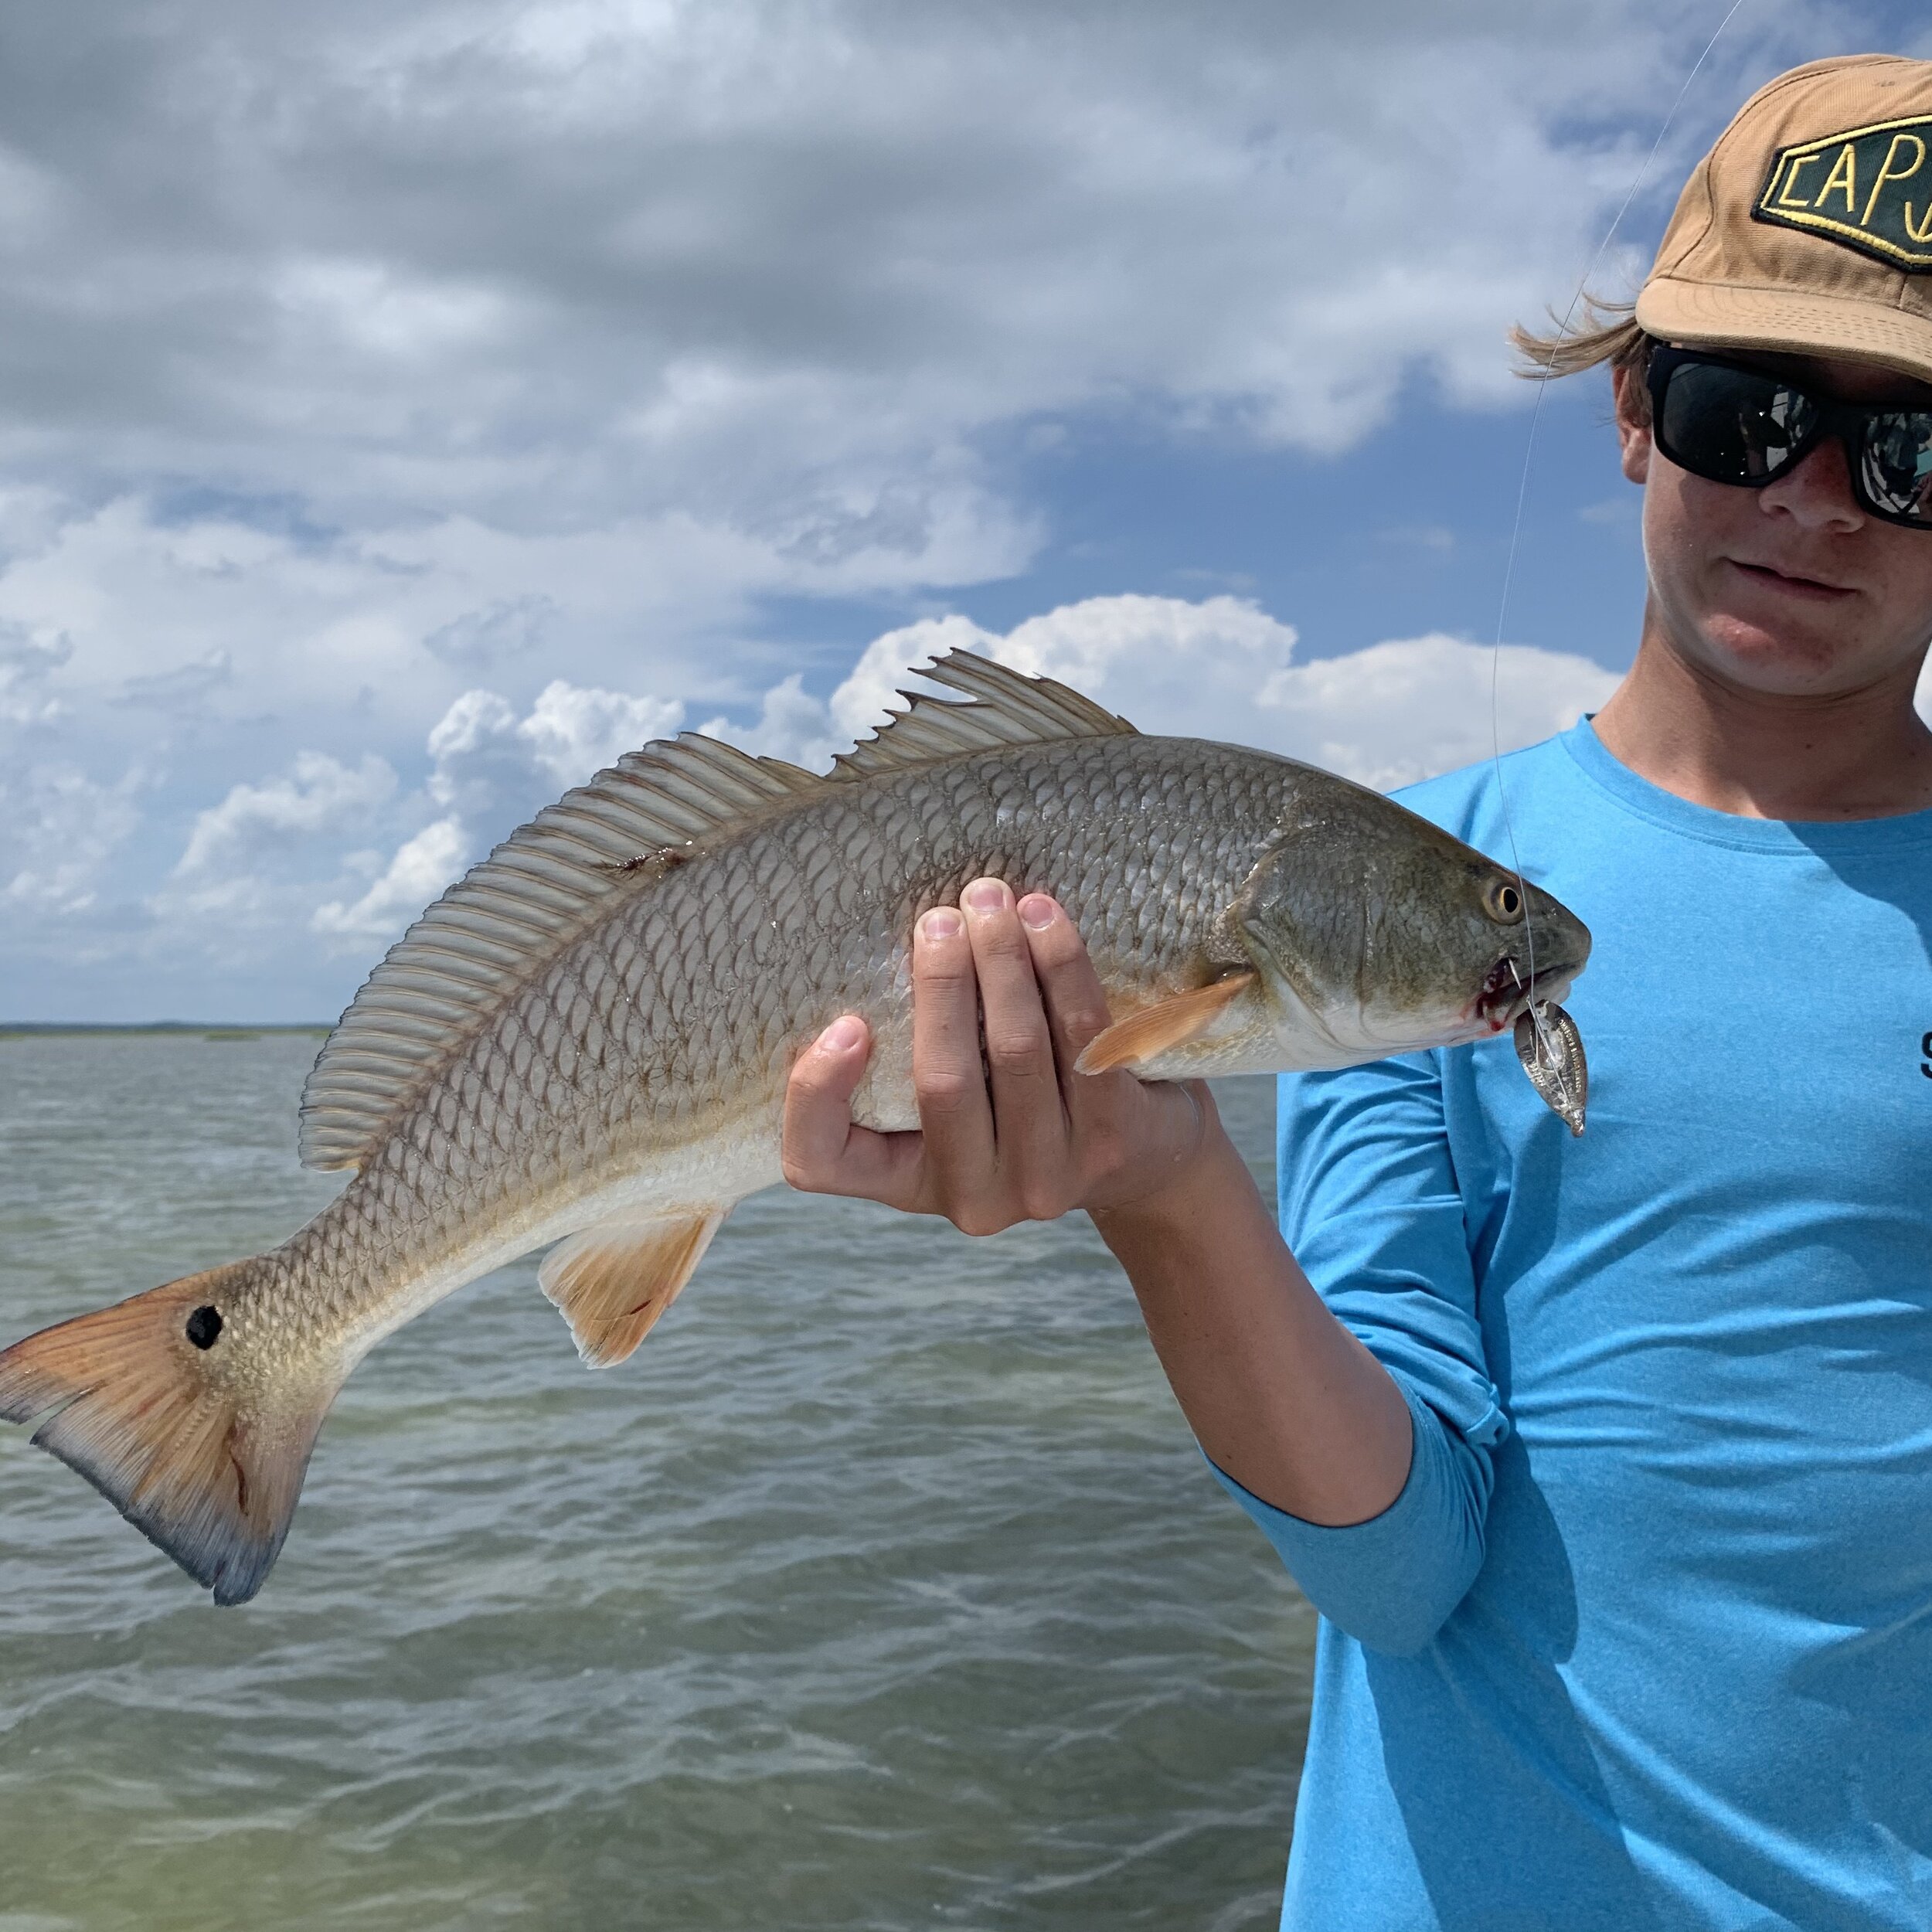 Late Summer Fishing Report - Reds are here! — Knot the Reel World